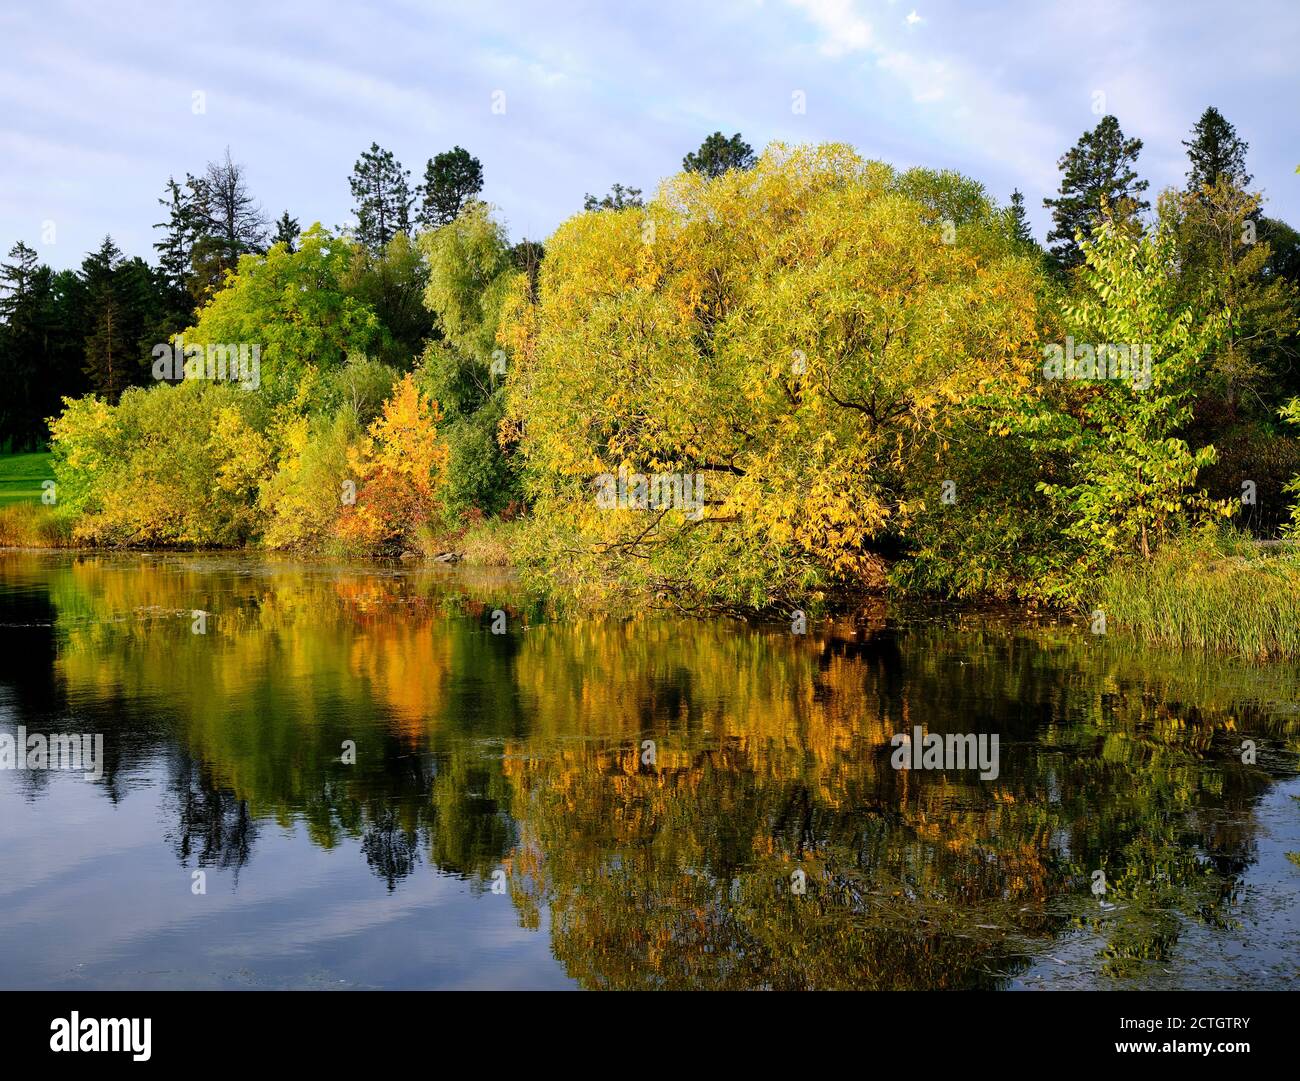 Ottawa, Canada. September 23rd, 2020. On the first full day of autumn, leaves starting to changes on trees along Dow's Lake, part of the Rideau Canal waterways in the Nation's Capital. Credit: meanderingemu/Alamy Live News Stock Photo